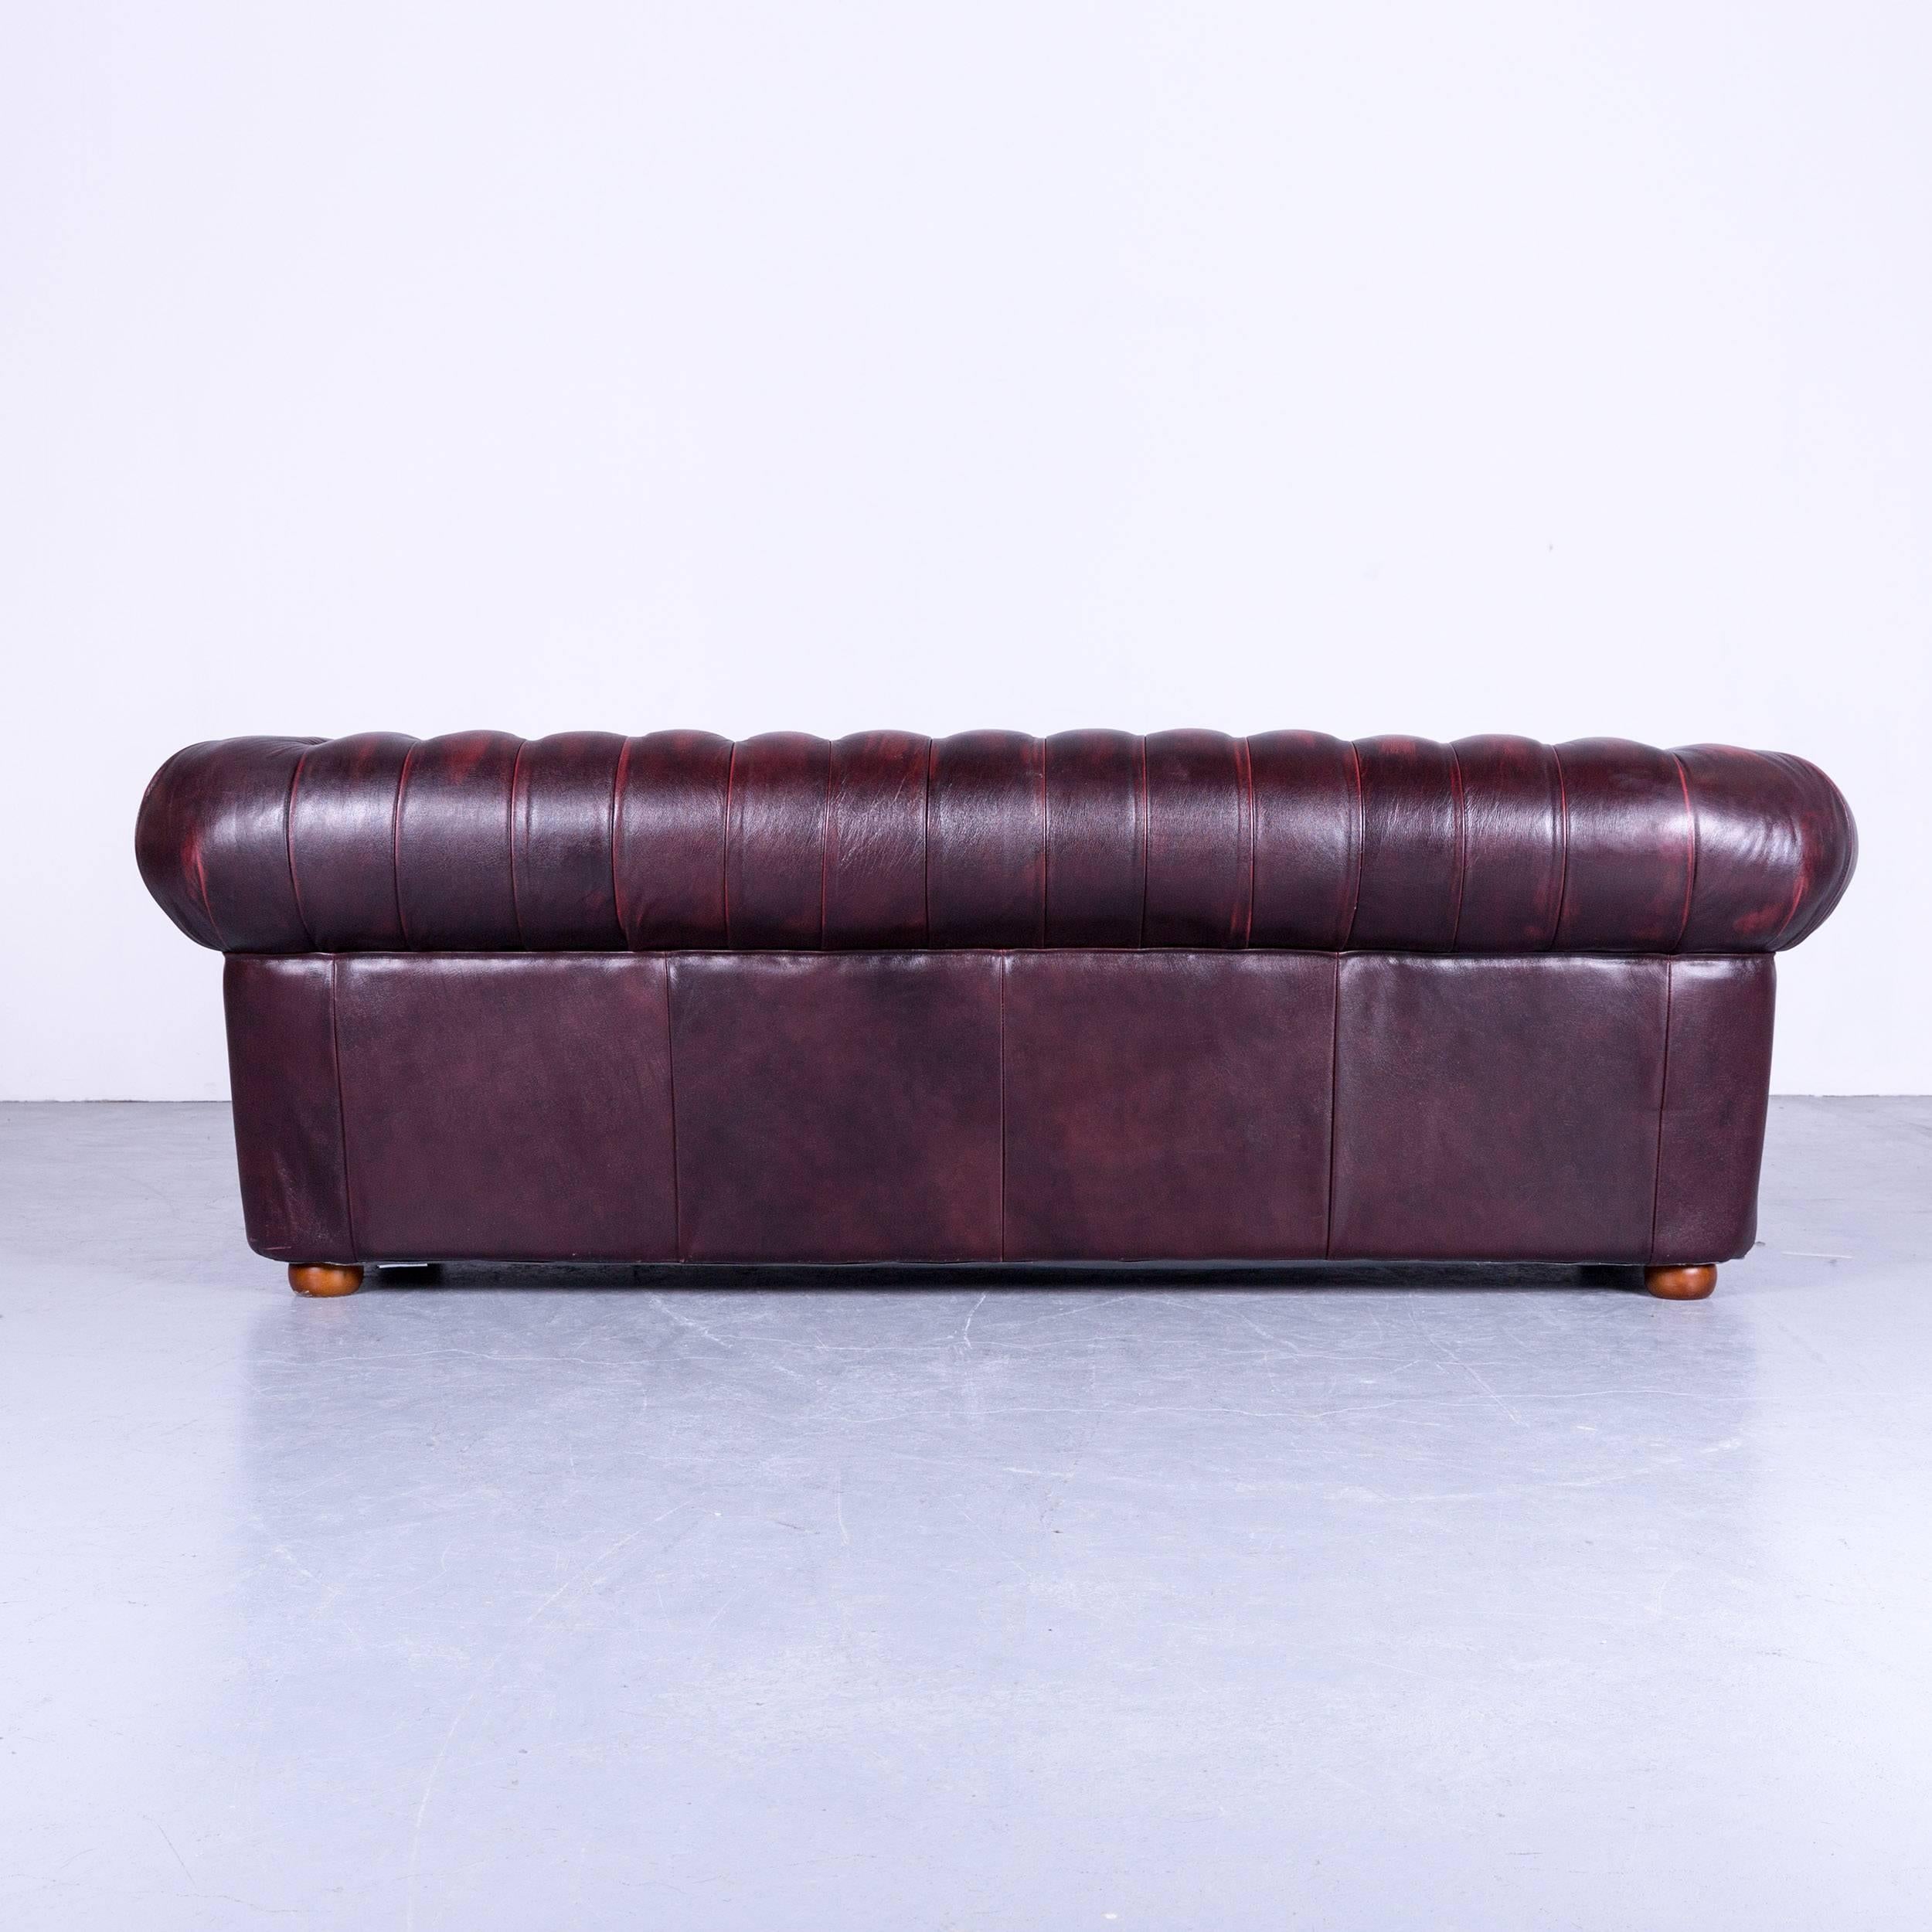 Chesterfield Three-Seat Sofa Red Leather Couch Vintage Retro Rivets 2